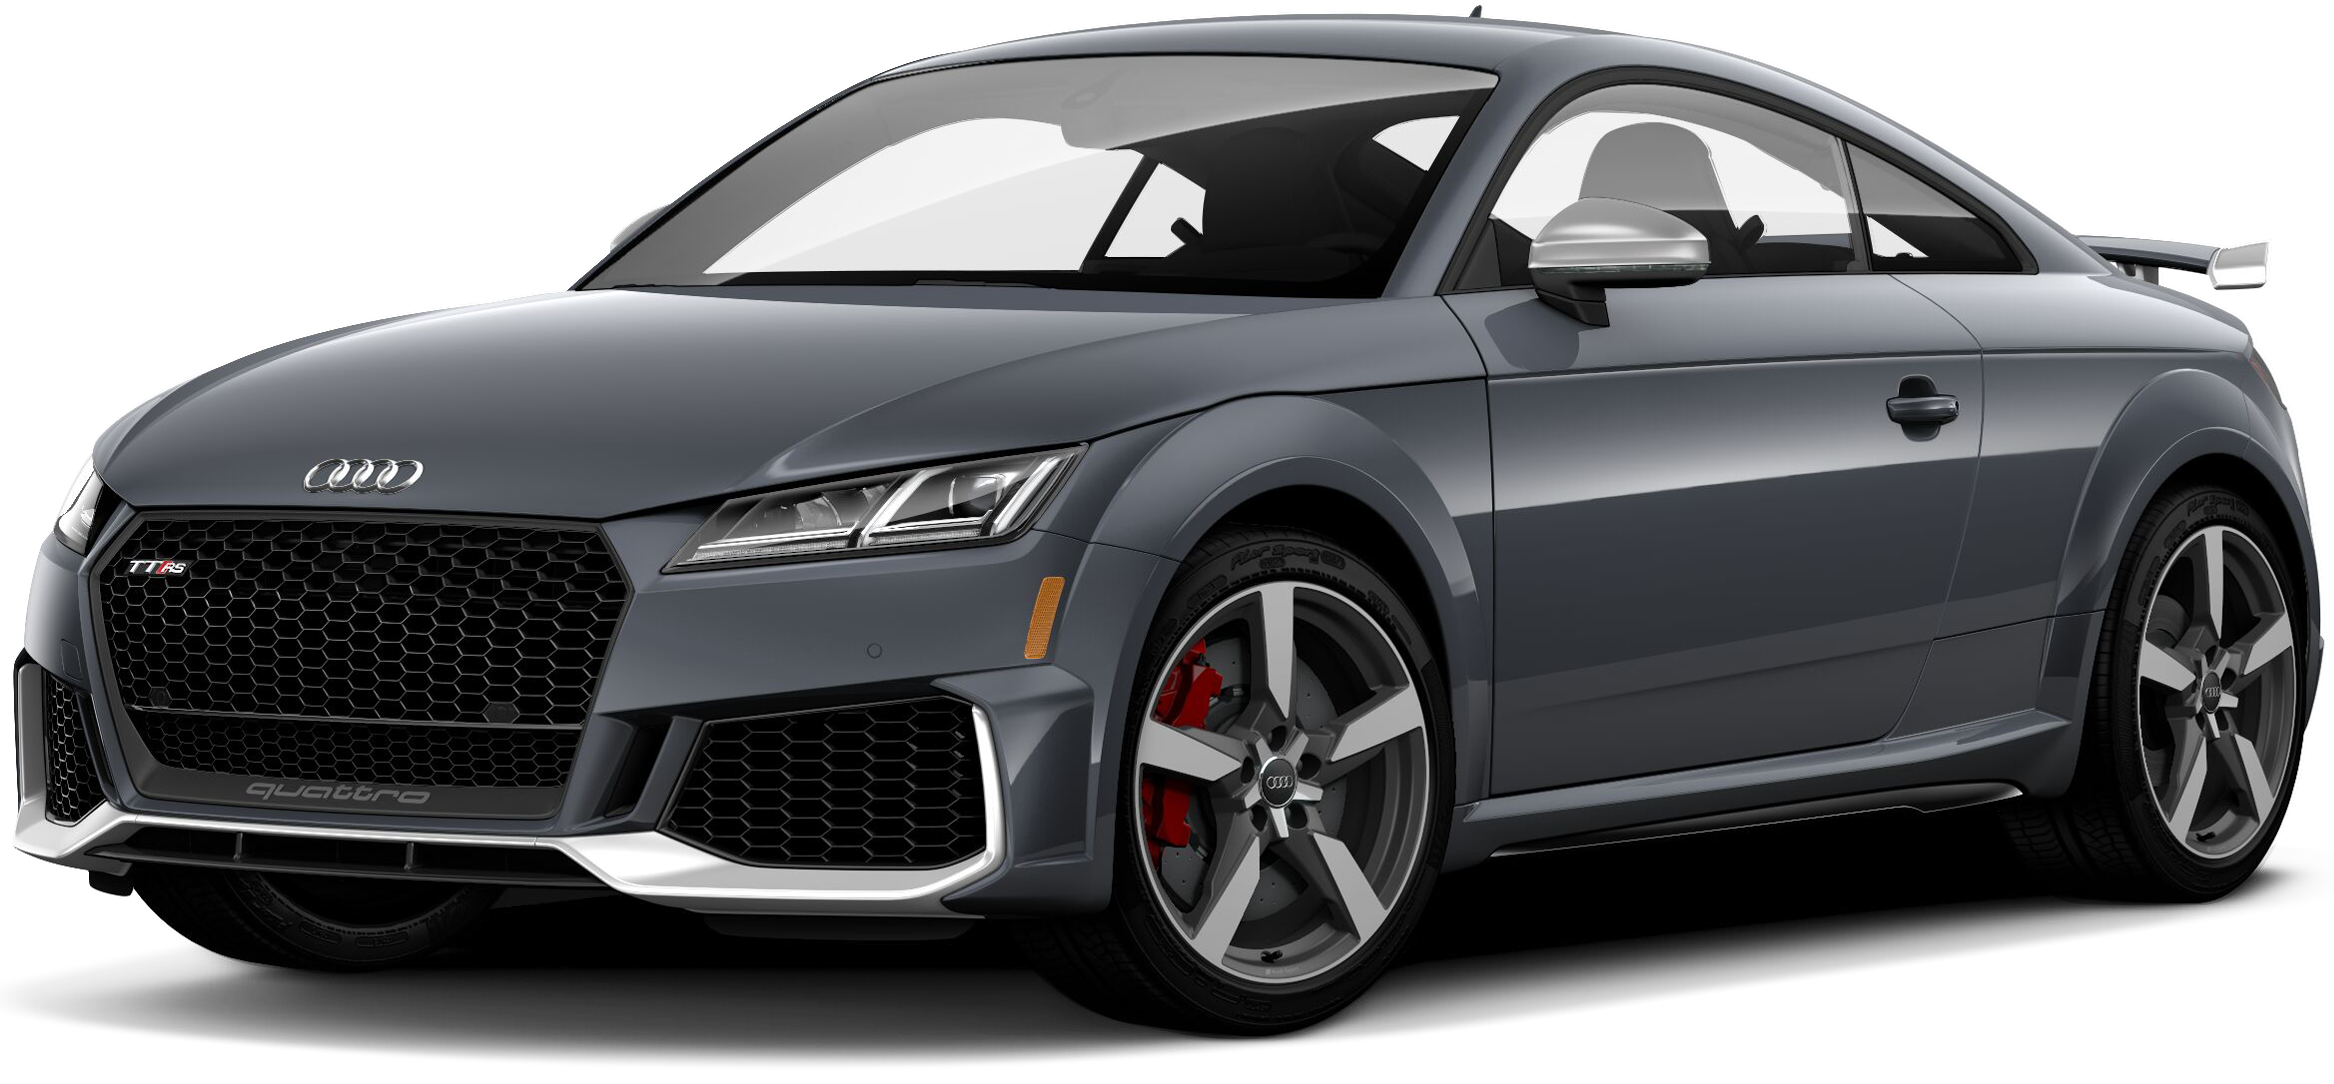 2020 Audi TT RS Incentives, Specials & Offers in Iowa City IA